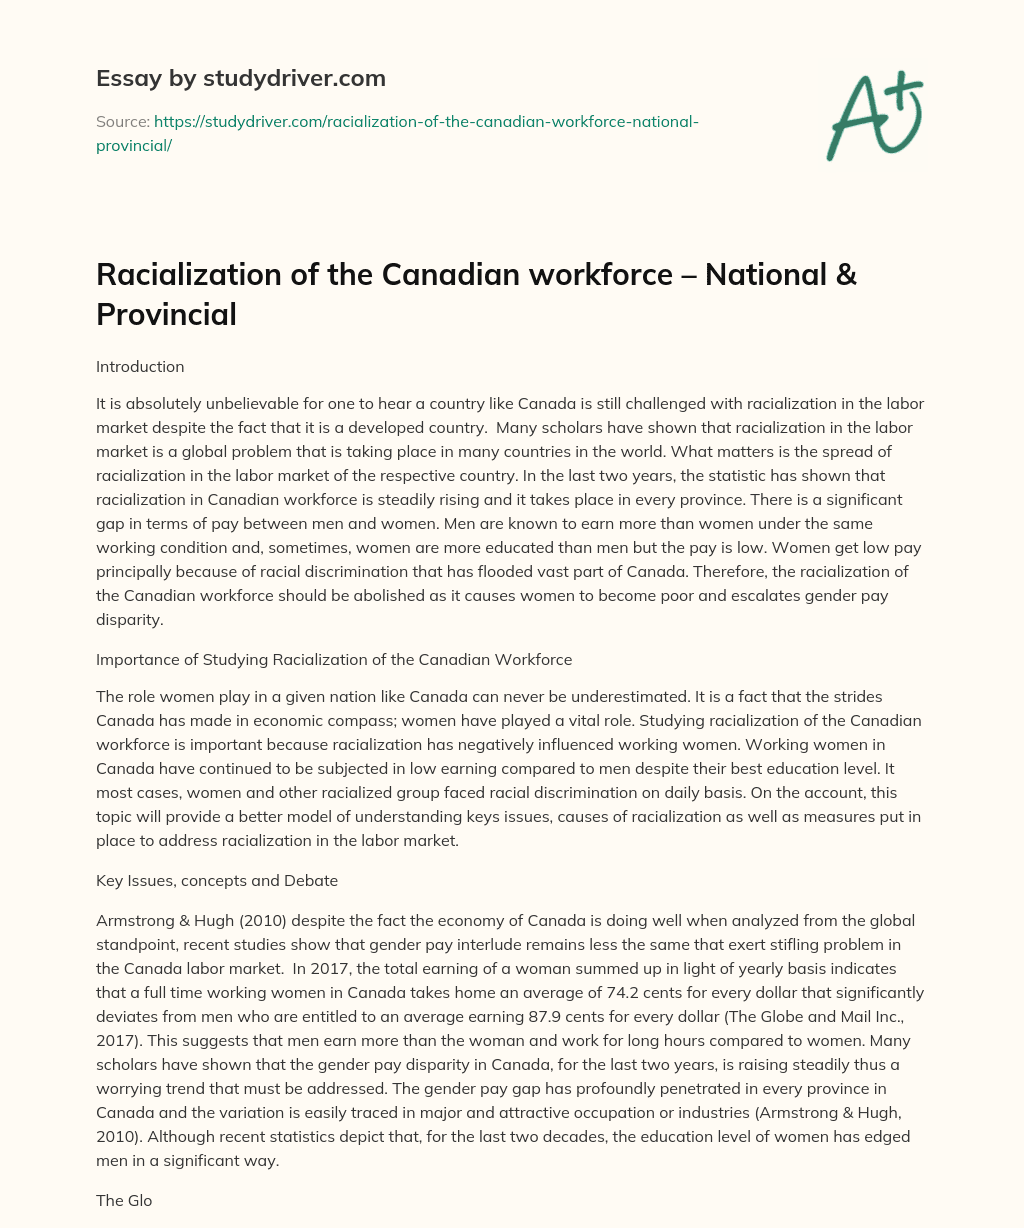 Racialization of the Canadian Workforce – National & Provincial essay